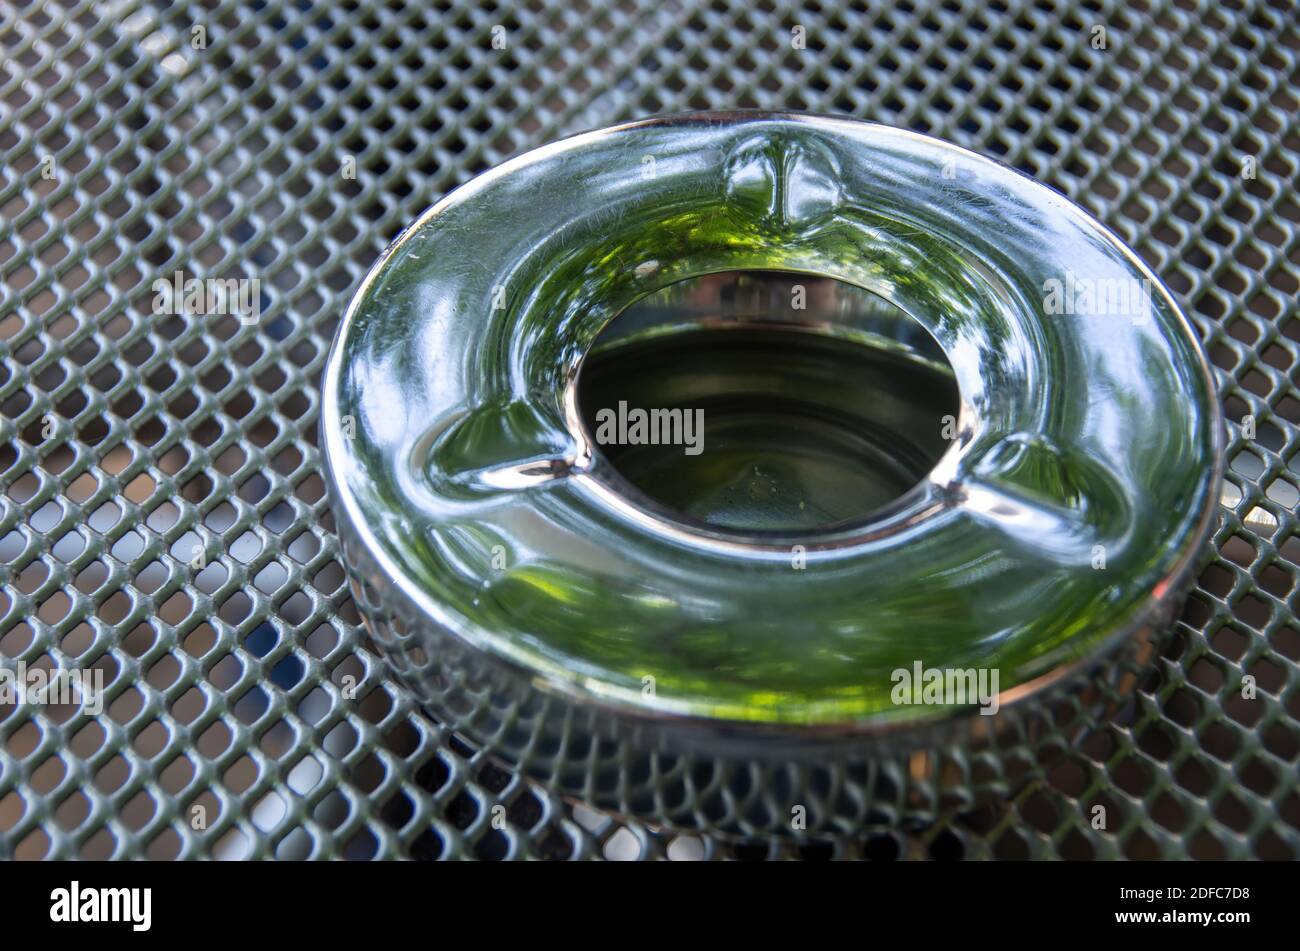 Empty metal ashtray on the surface of a wire mesh table. Stock Photo